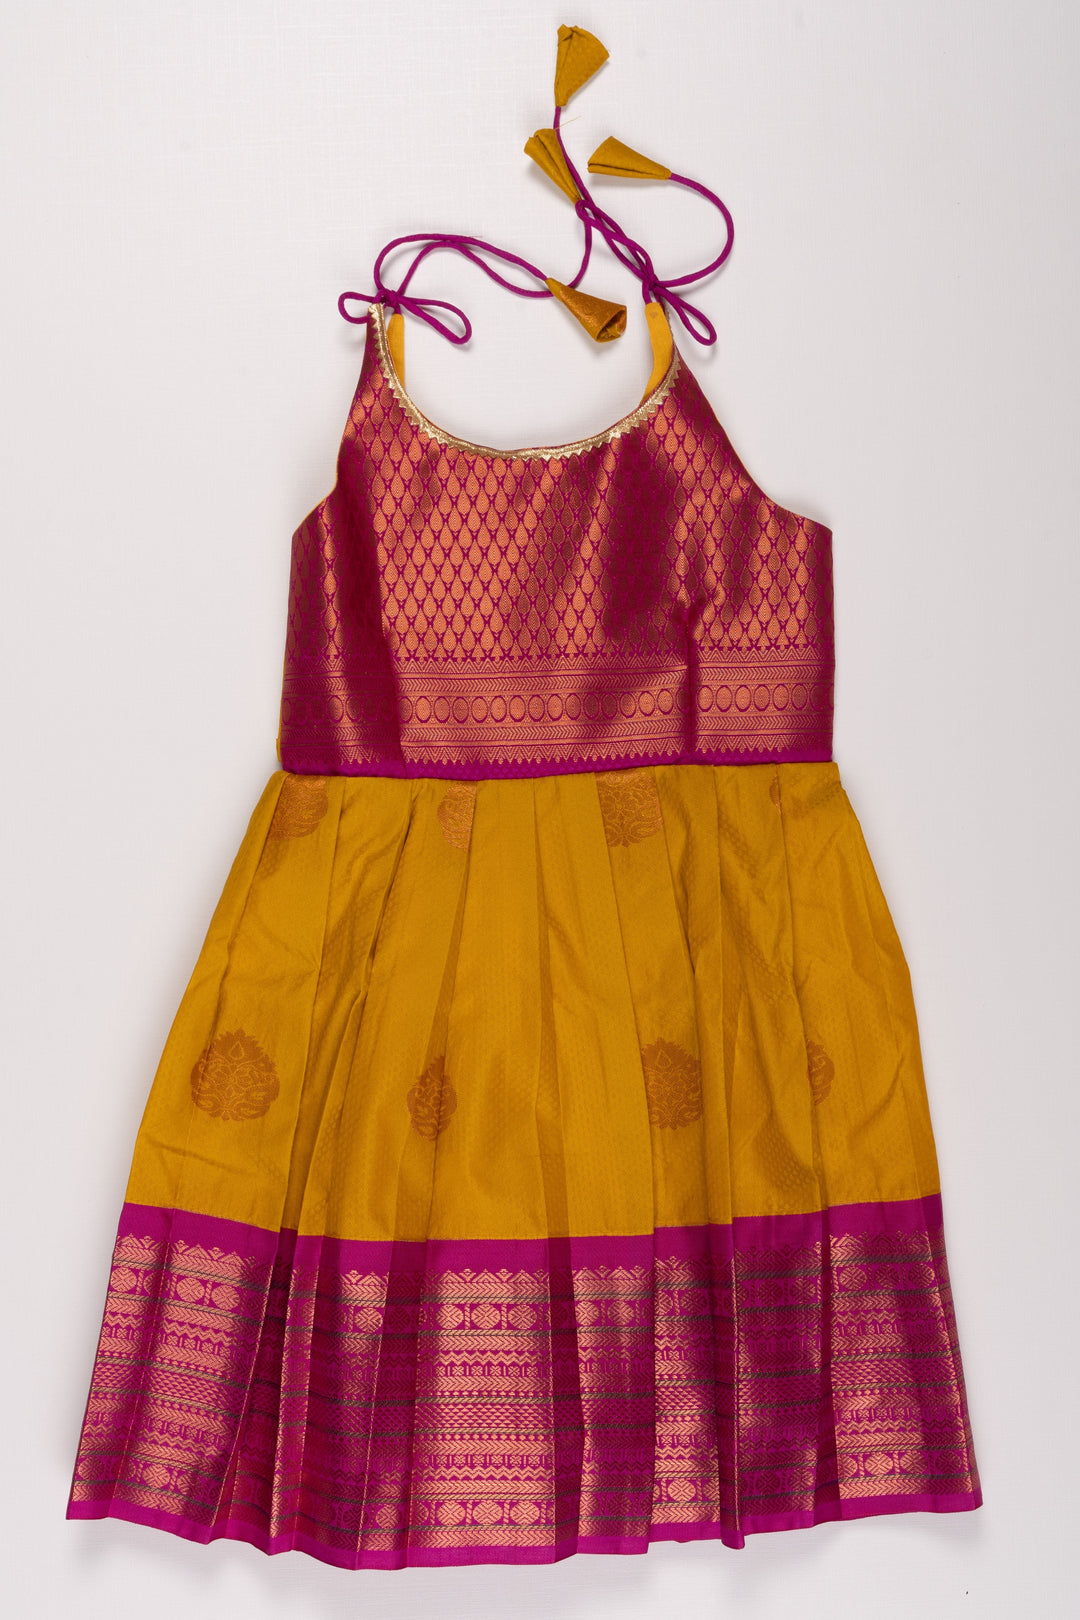 The Nesavu Tie Up Frock Elegant Magenta and Yellow Silk Blend TieUp Frock with Intricate Gold Border Detailing Nesavu 20 (3Y) / Yellow / Style 2 T338B-20 Magenta and Yellow Silk Frock | Ethnic Party Dress with Gold Detailing | The Nesavu